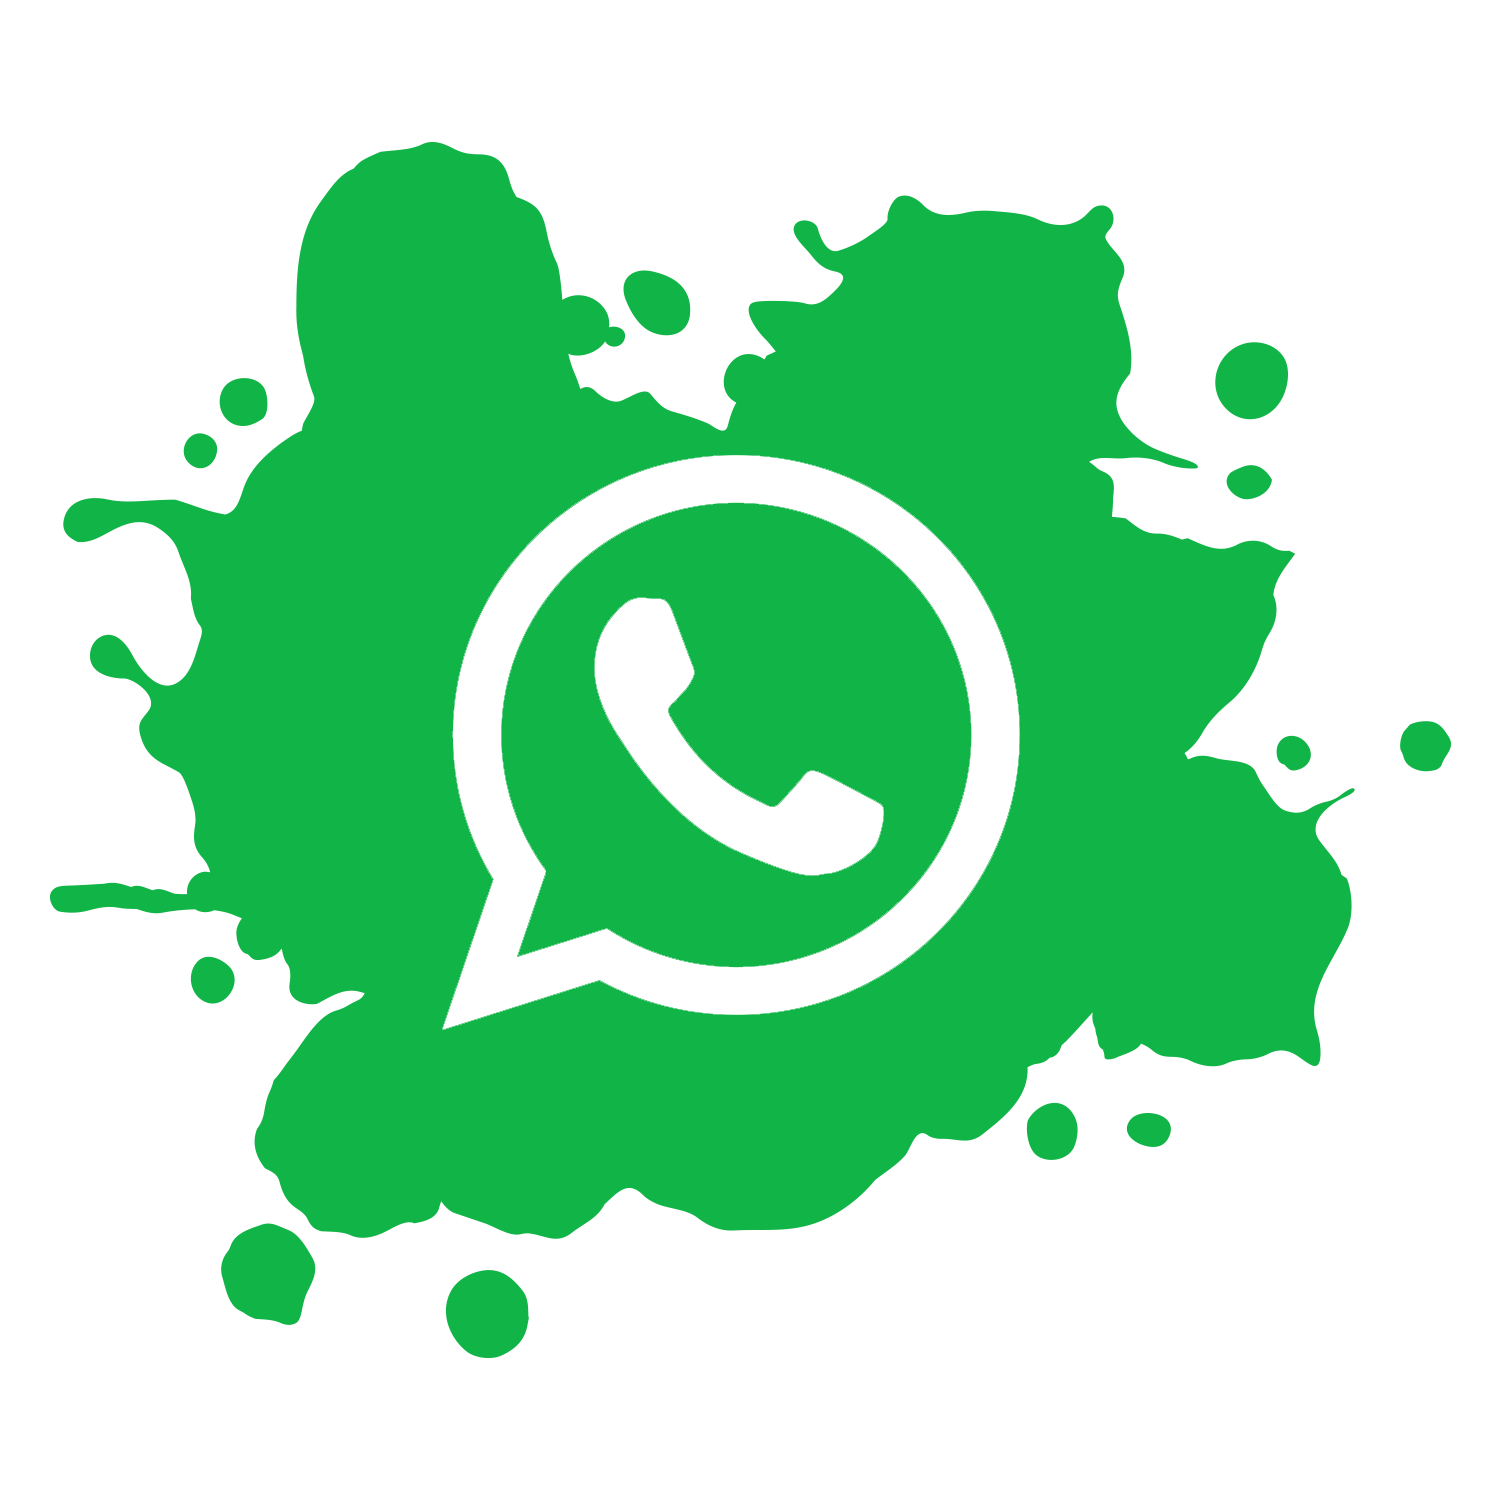 CITYPNG.COMHD Green Paint Splash Outline WhatsApp Logo Icon PNG 1500x1500